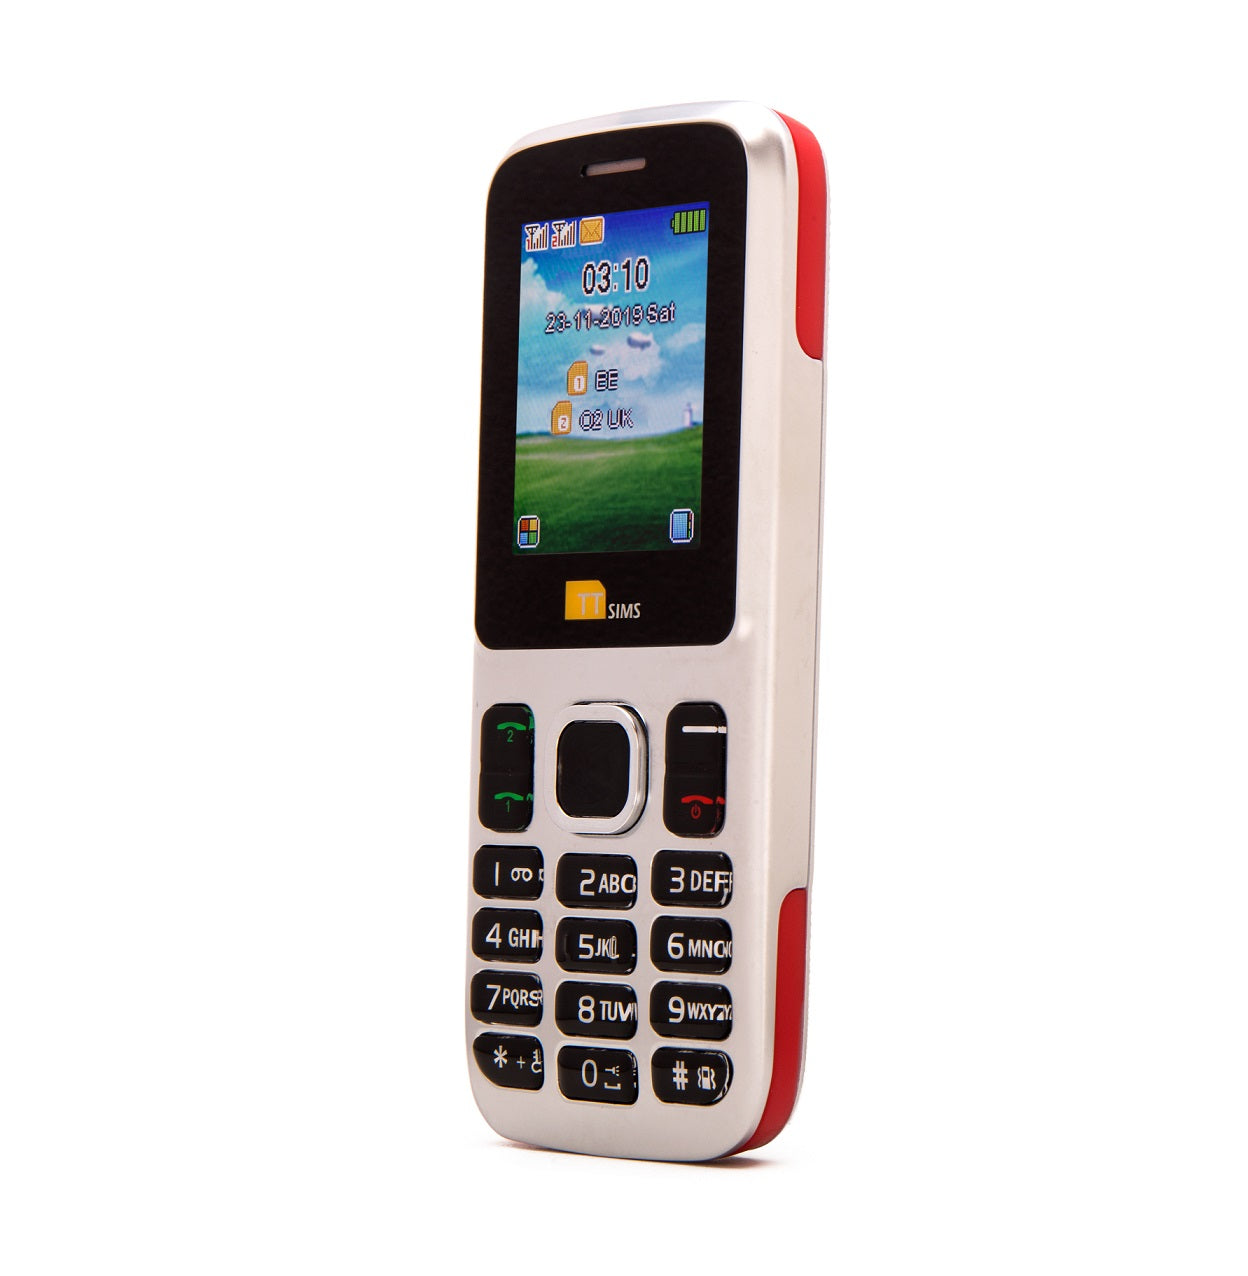 TTfone Red TT130 Dual Sim - Warehouse Deals with Mains Charger